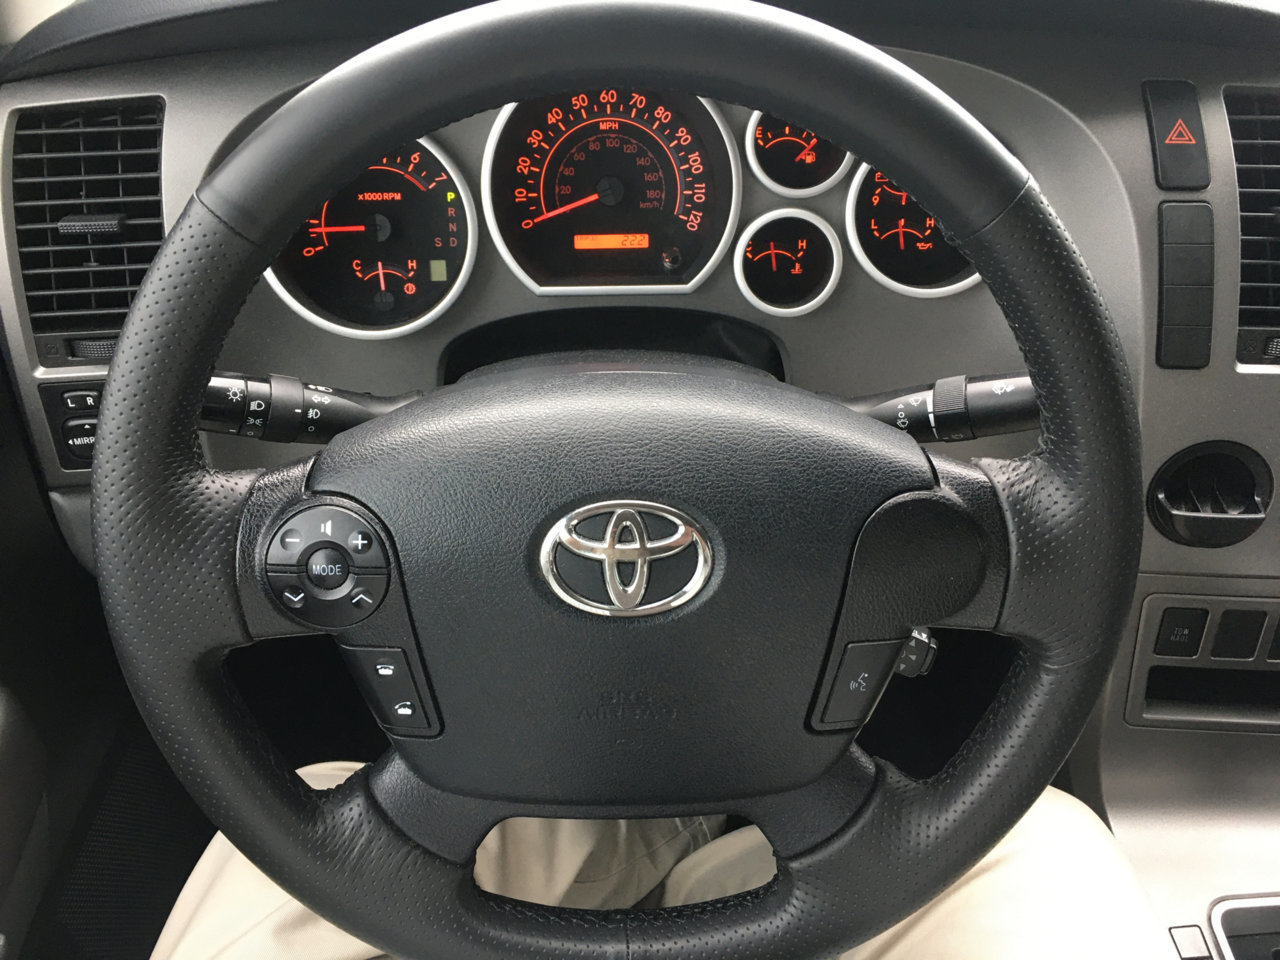 Loncky Black Genuine Leather Custom Steering Wheel Covers for 2012-2019 Toyota Tacoma 2014-2019 Toyota Tundra 2010 2011 2012 2013 2014-2019 Toyota 4Runner 2014-2019 Toyota Sequoia Accessories lfy-0051 